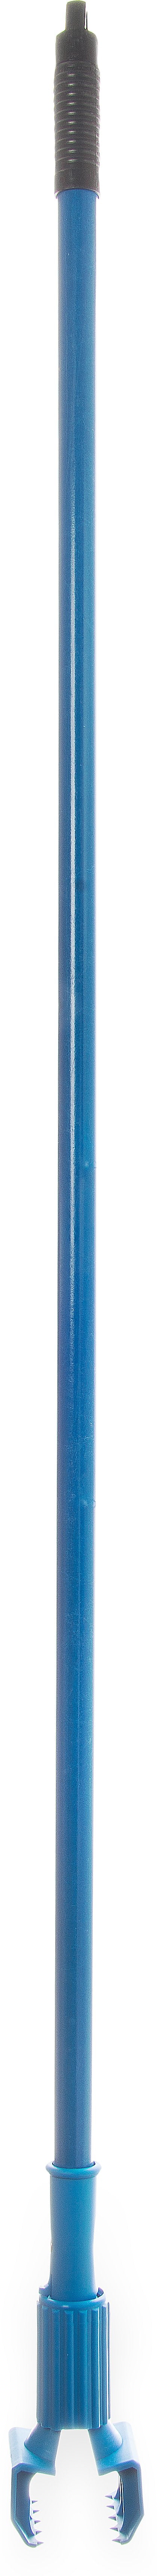 Carlisle 70 in. Telescopic Handle to fit Microfiber Mop Head (12-Pack)  363367000 - The Home Depot